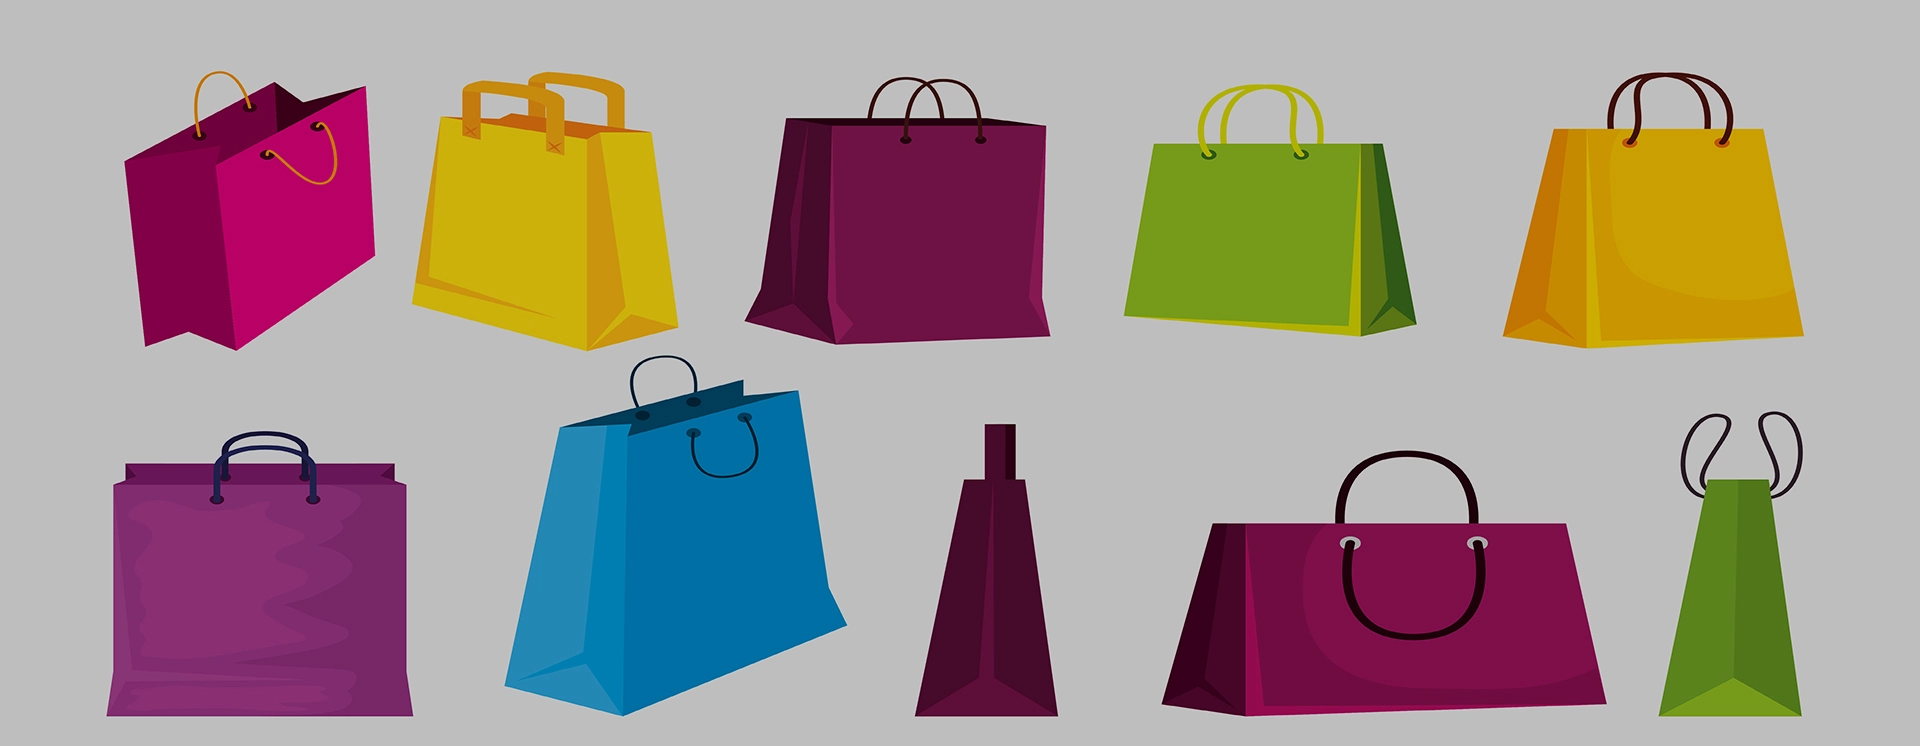 Wholesale Grocery Shopping Tote Bag Materials